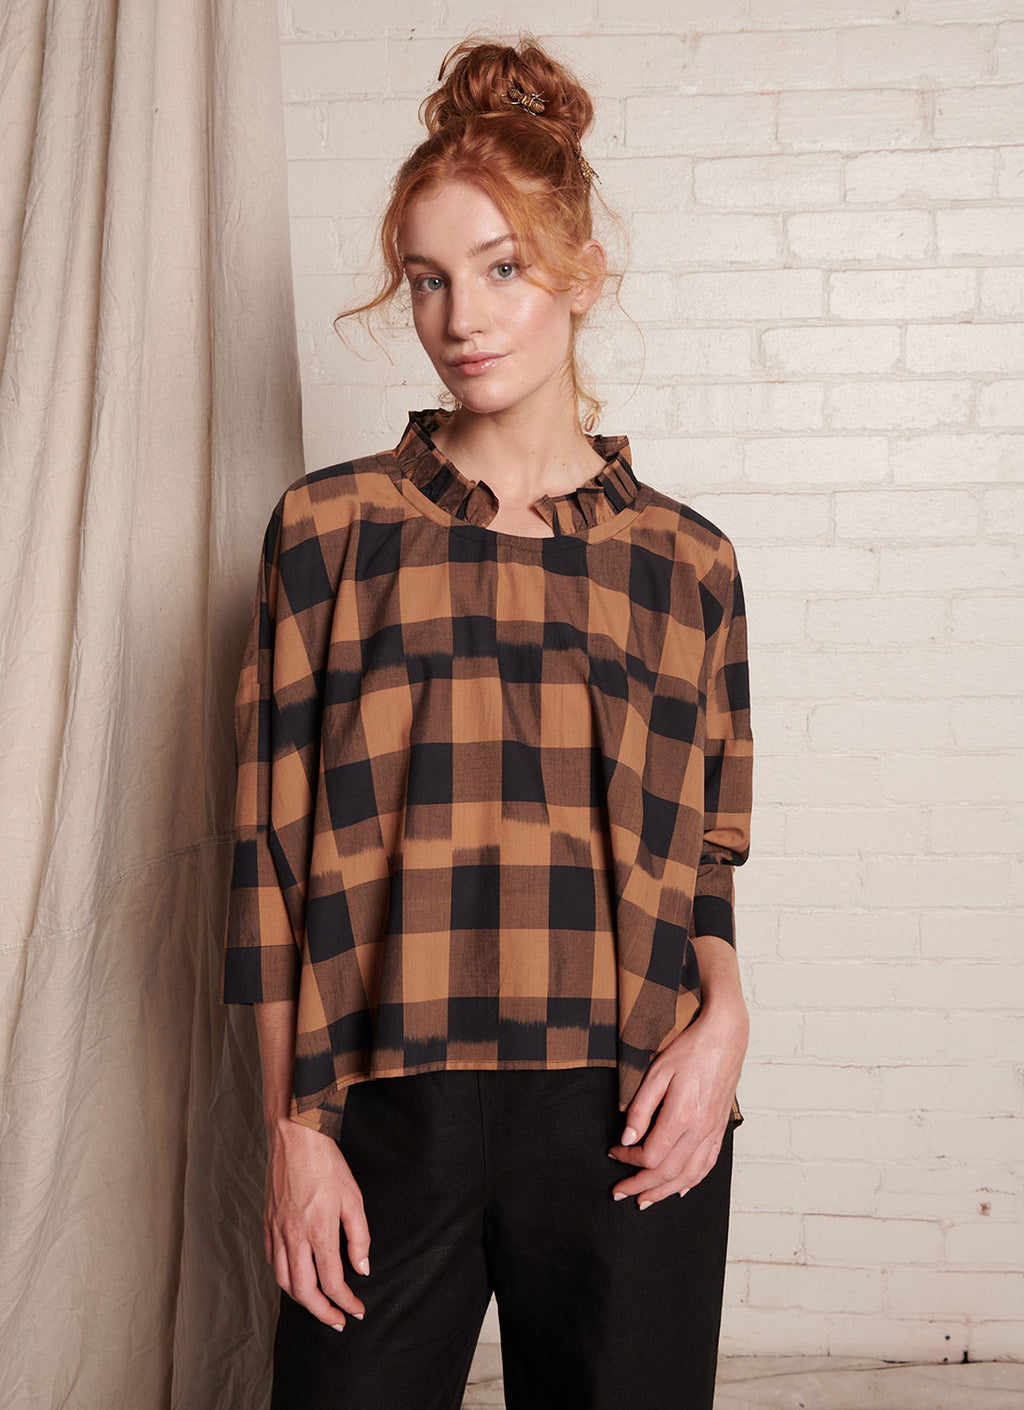 A bronze plaid, relaxed fit, square-cut top with 3/4 sleeves, frilled collar and tie closure at the back made from handwoven ikat cotton